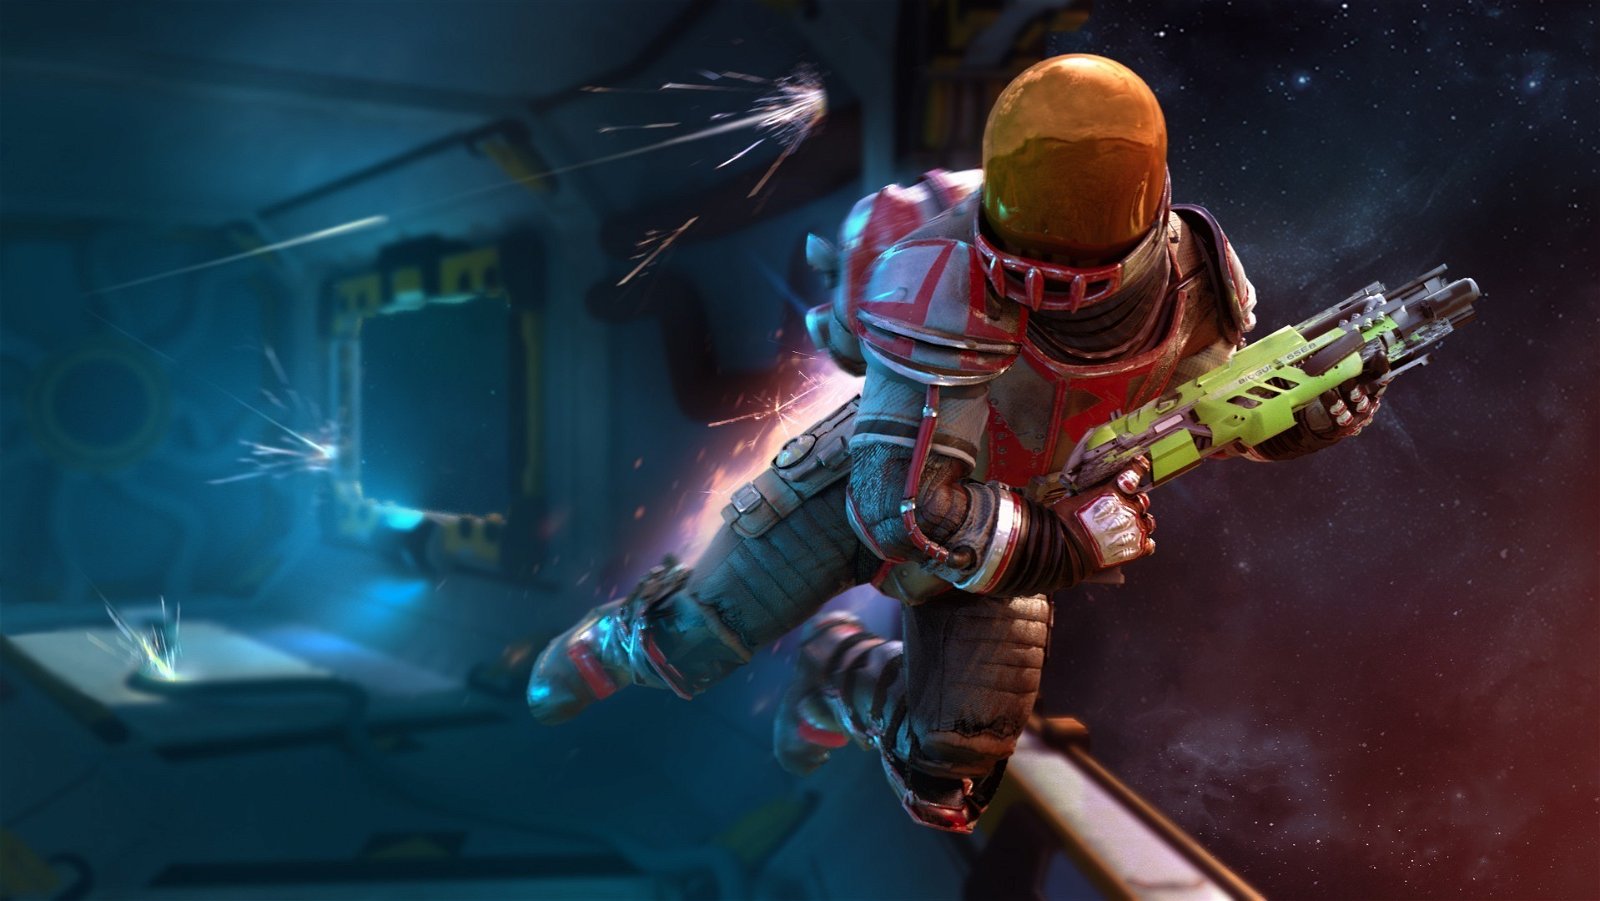 Space Junkies, PlayStation 4, English, Asia, PS4, PSVR, price, release date, gameplay, features, pre-order